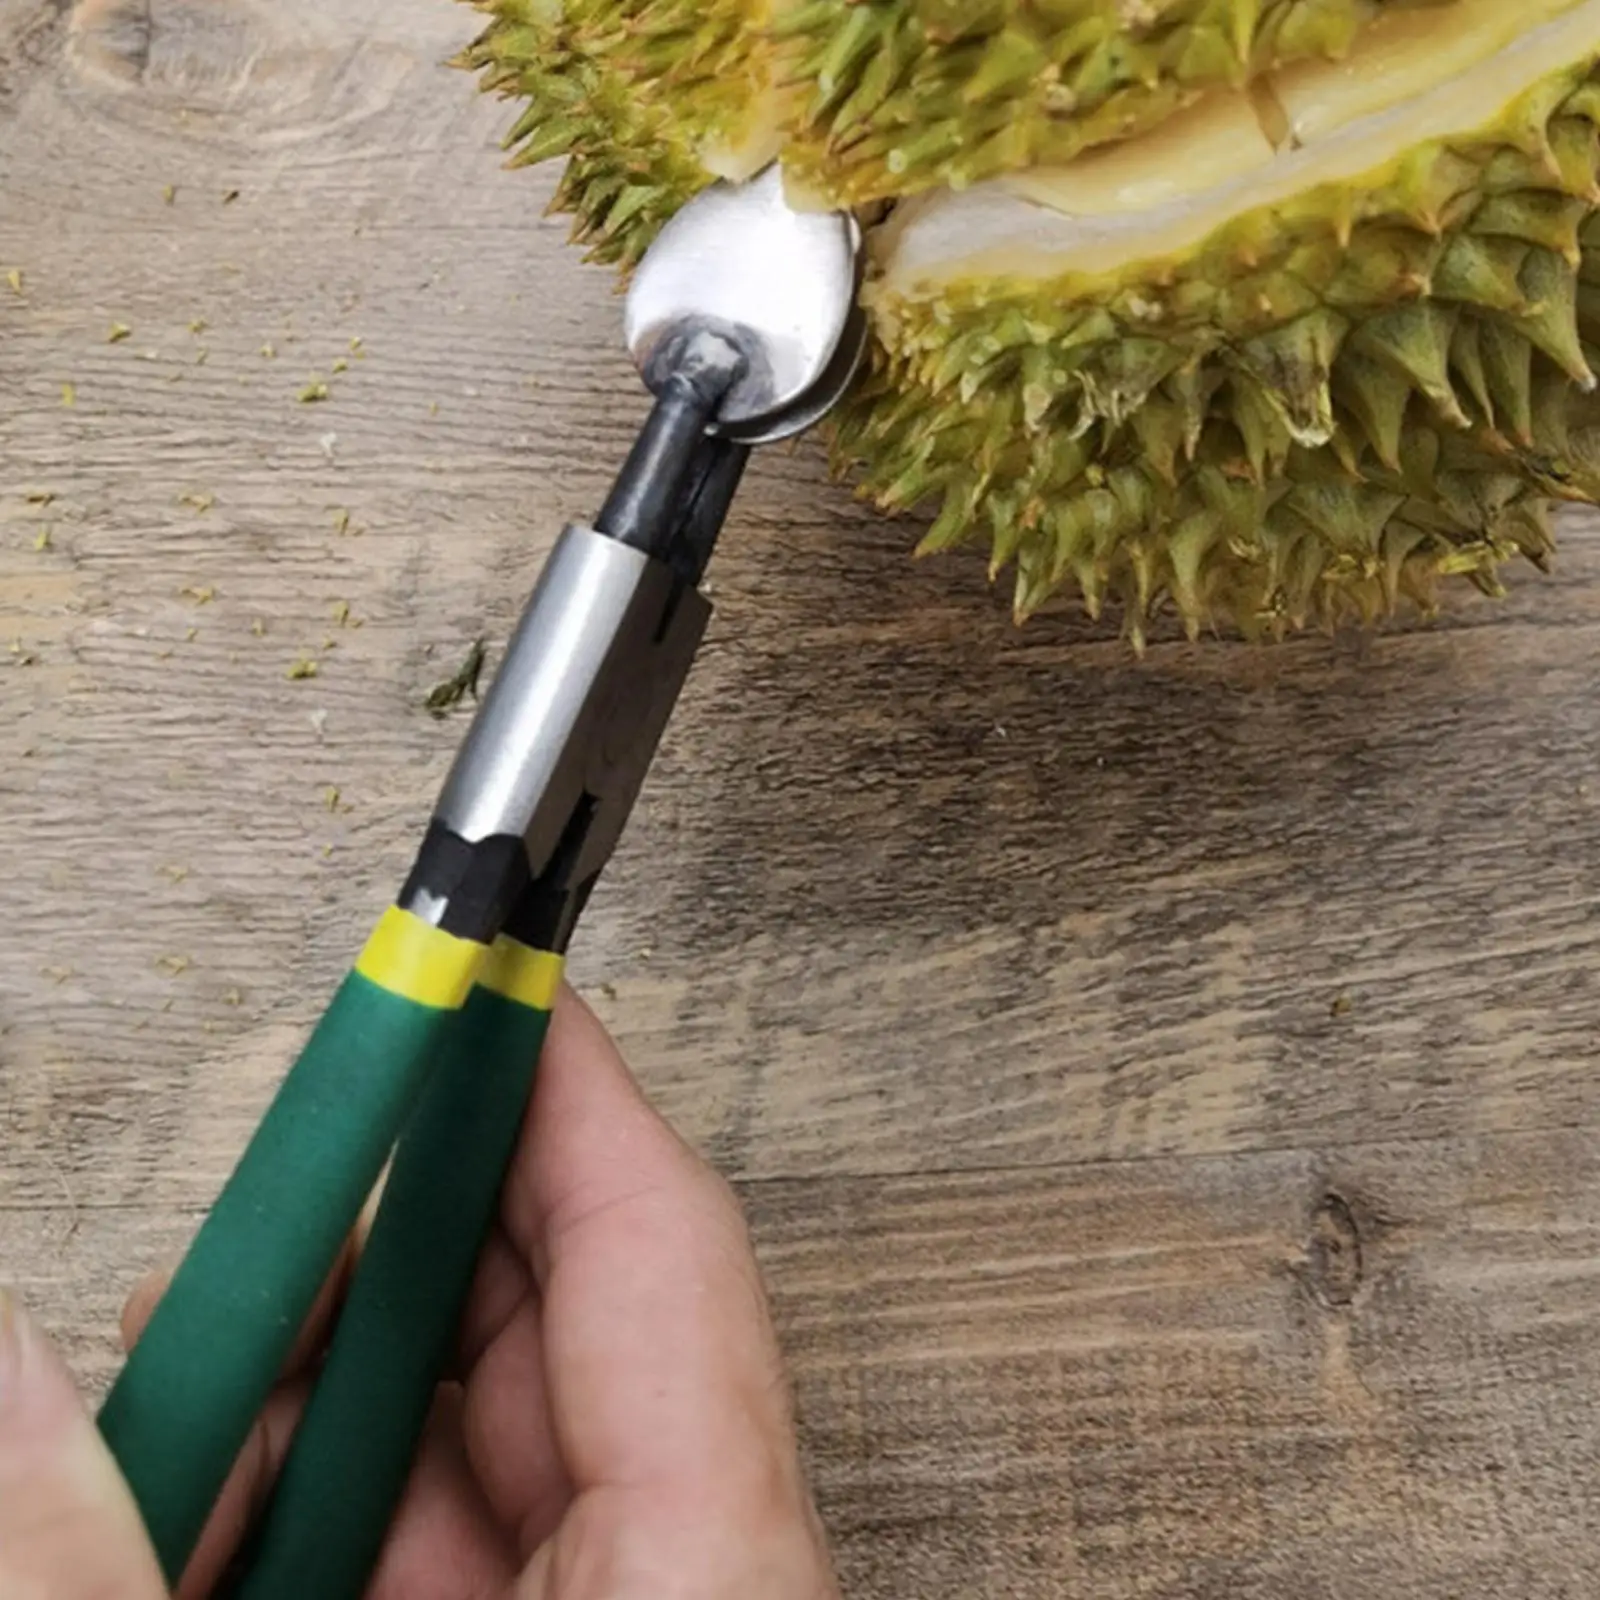 Durian Peel Breaking Tool Durable Peeling Smooth Durian Opener Manual Durian Shelling Machine for Kitchen Restaurant Household